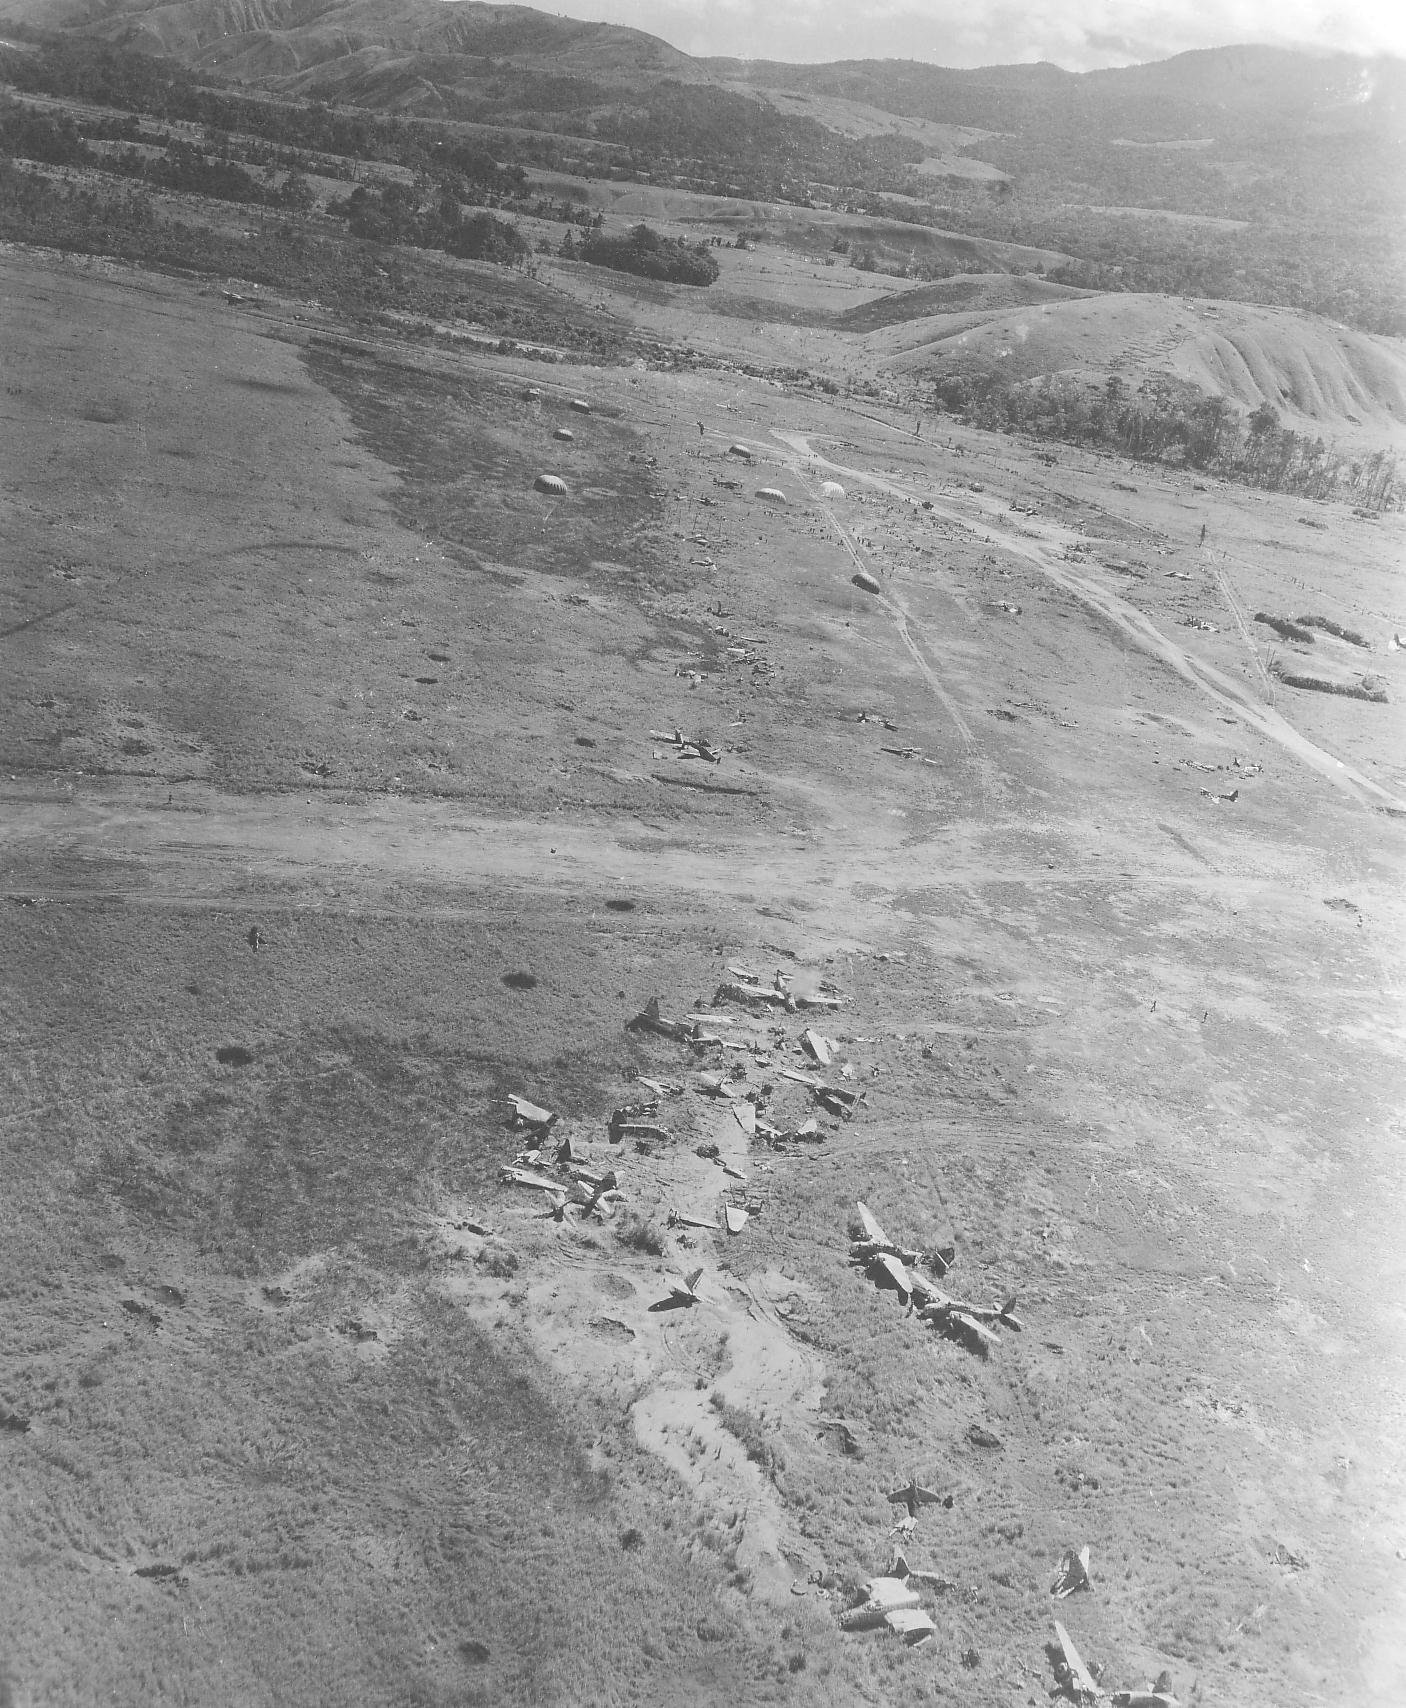 Bomb Damage Assessment photo of destroyed Ki-48 bombers at a Japanese airstrip in northern New Guinea, 1942-1943, photo 2 of 2; note open parachutes in upper center (bombs or supplies?)